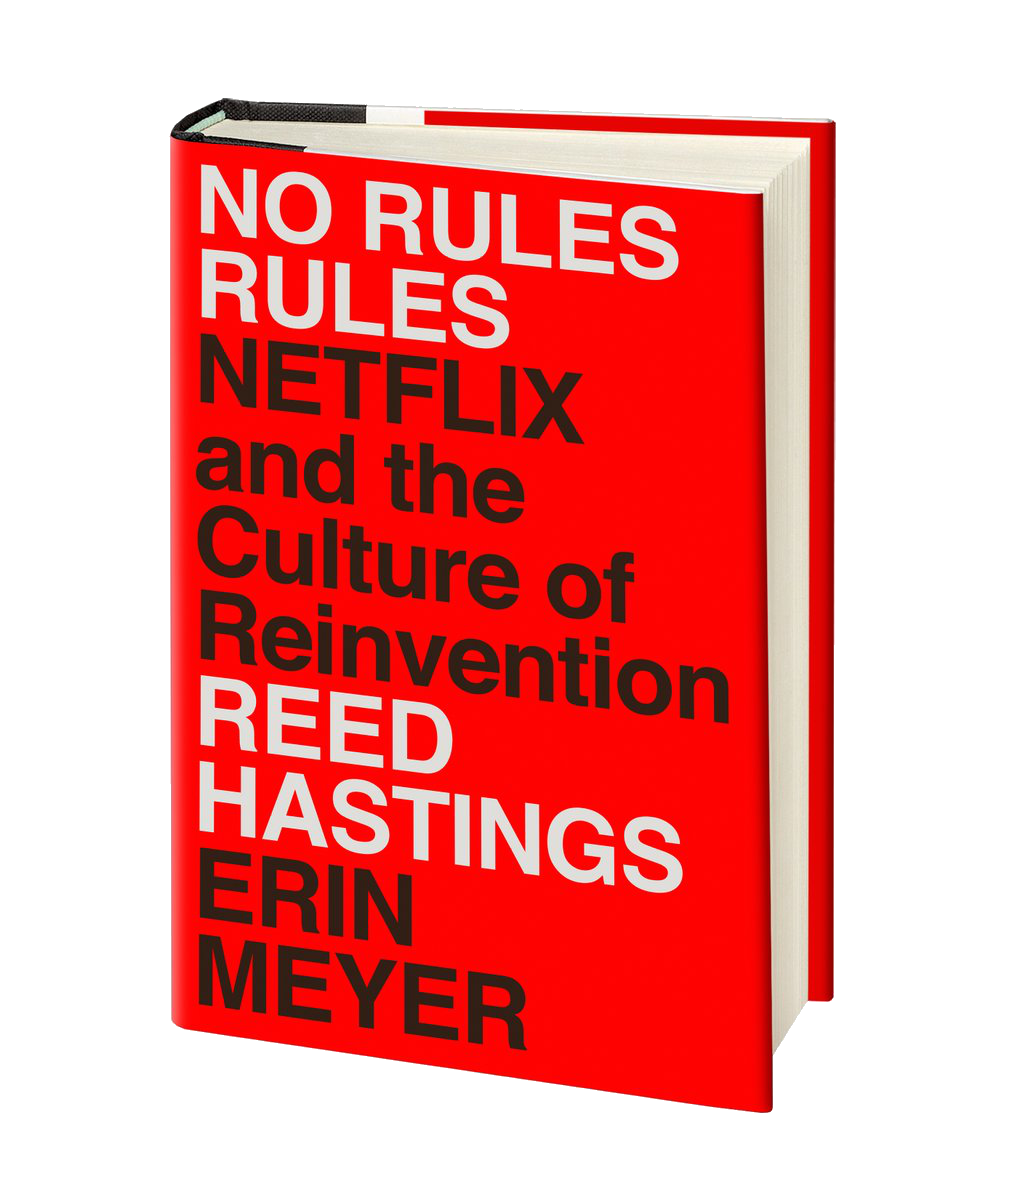 no rules rules book